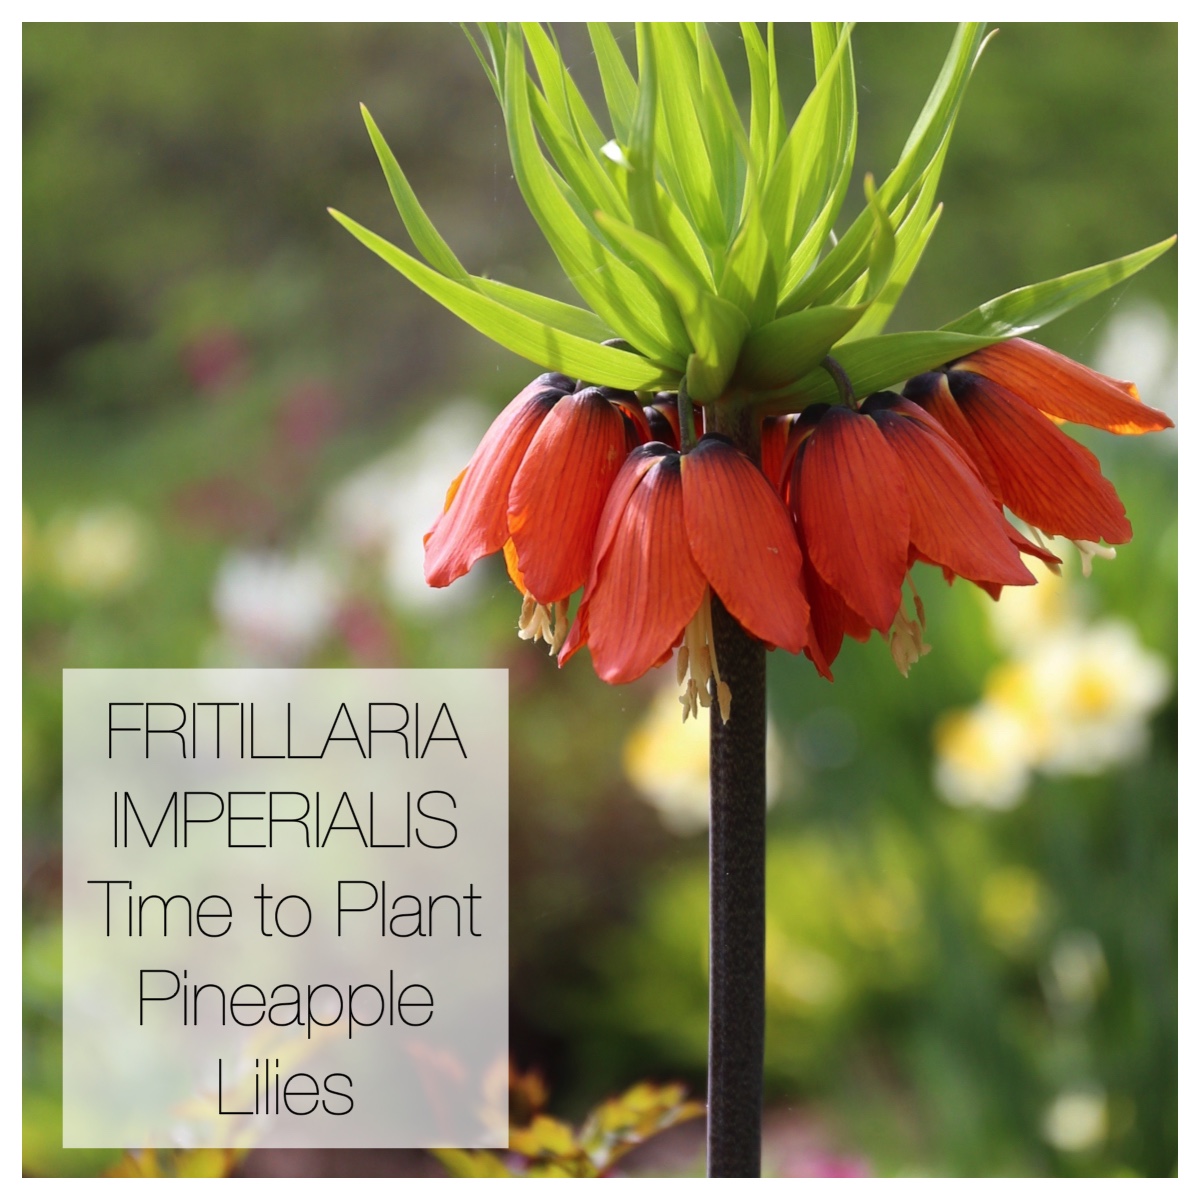 Fritillaria imperialis: Time to Plant Pineapple Lilies